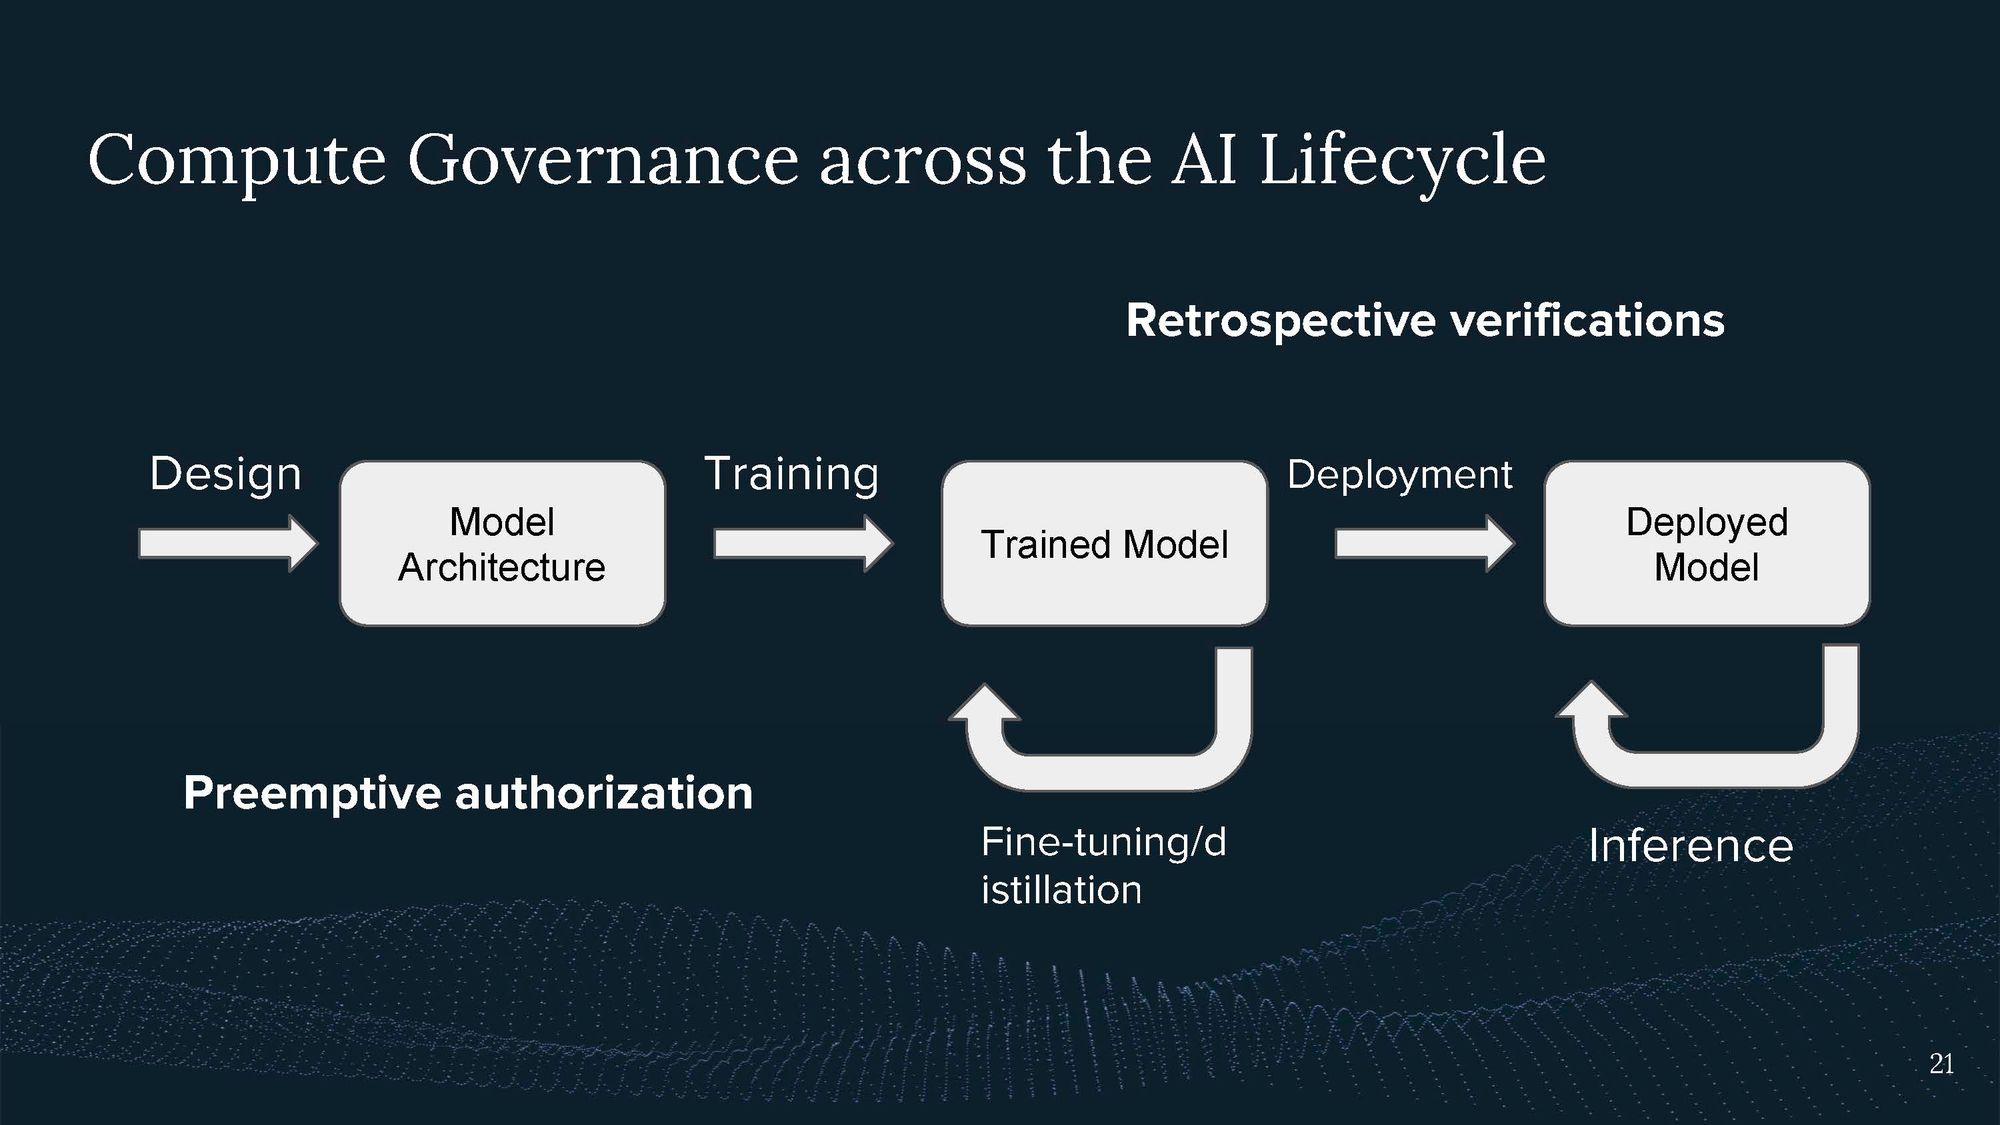 Video and Transcript of Presentation on Introduction to Compute Governance